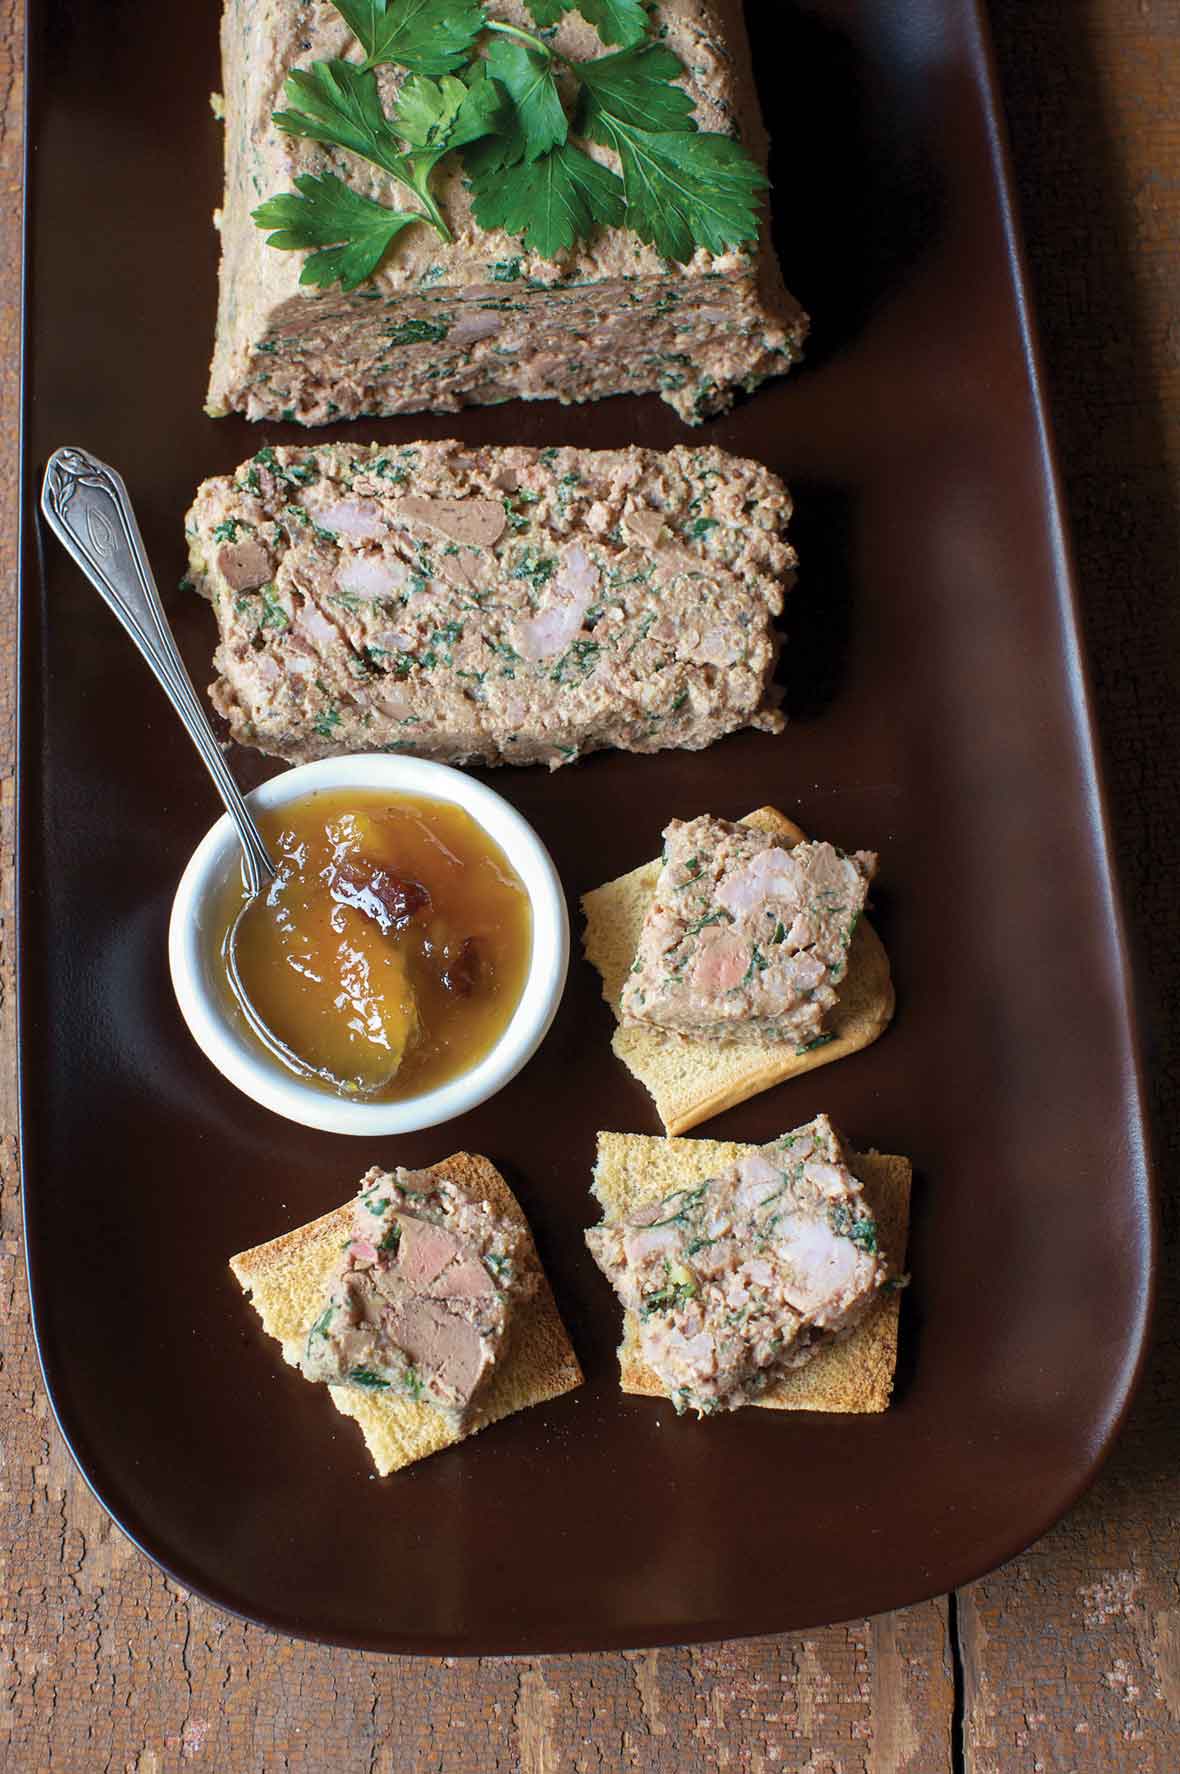 Chicken liver pate on a wooden tray with slices on toast beside a bowl of chutney.